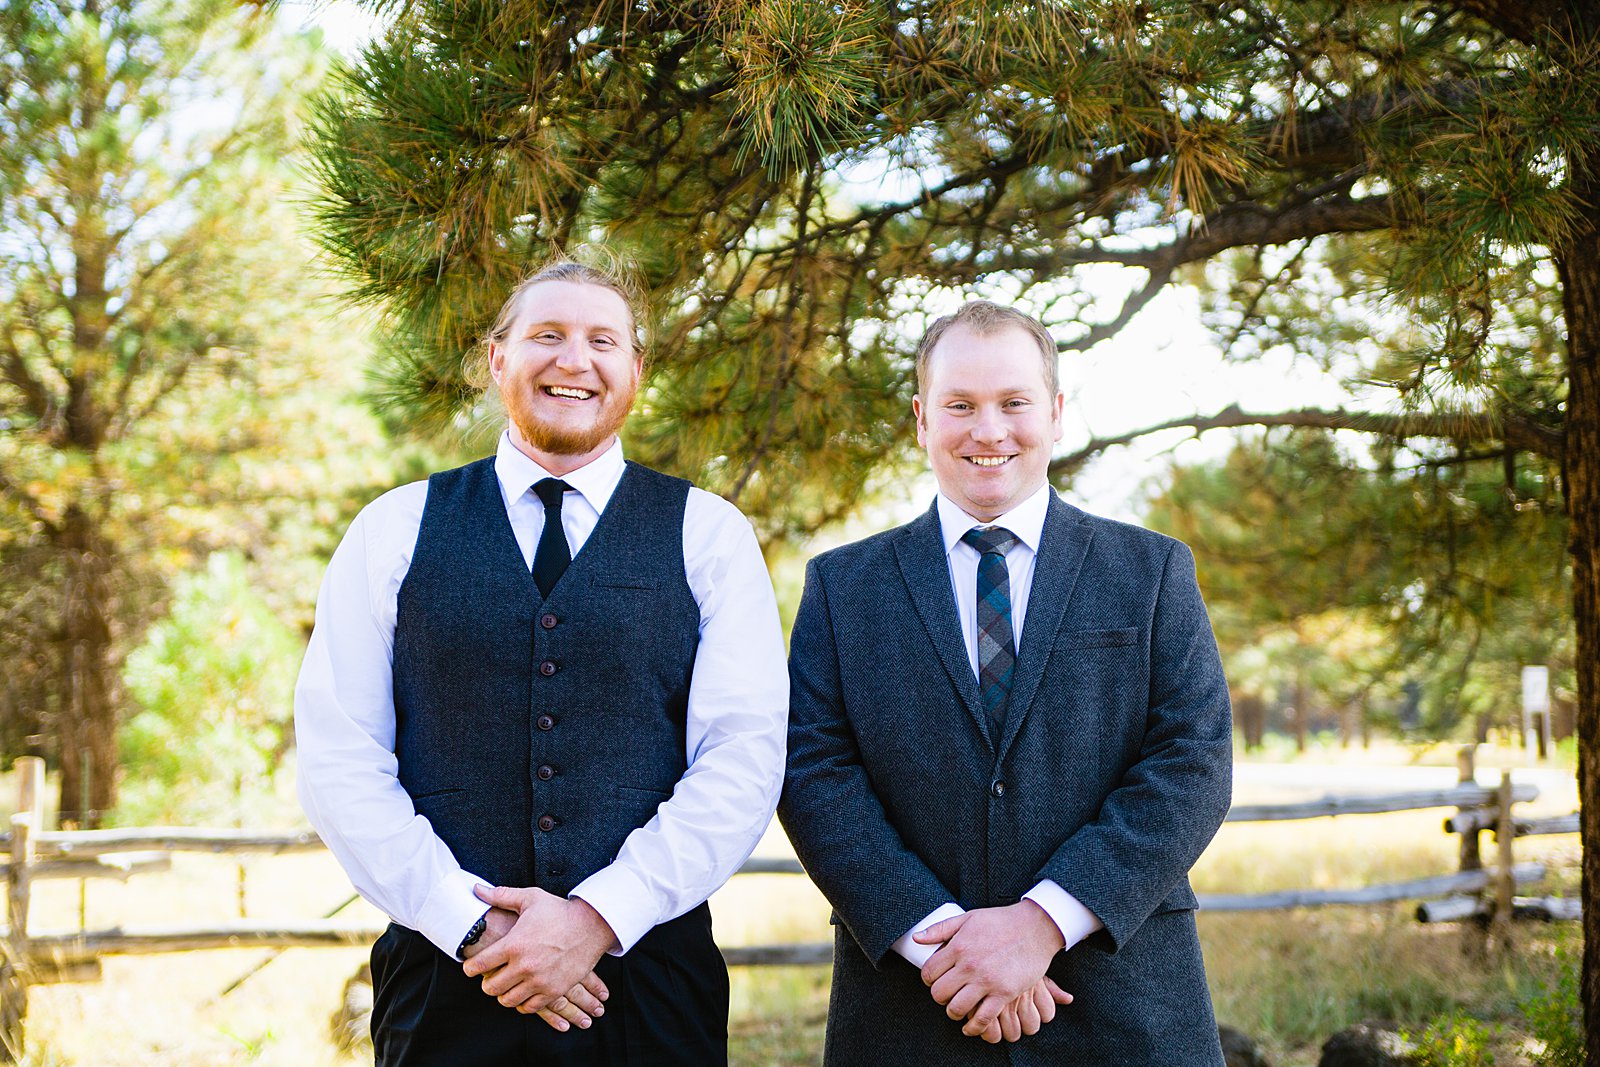 Groom and groomsmen laughing together at Chapel of the Holy Dove wedding by Flagstaff wedding photographer PMA Photography.